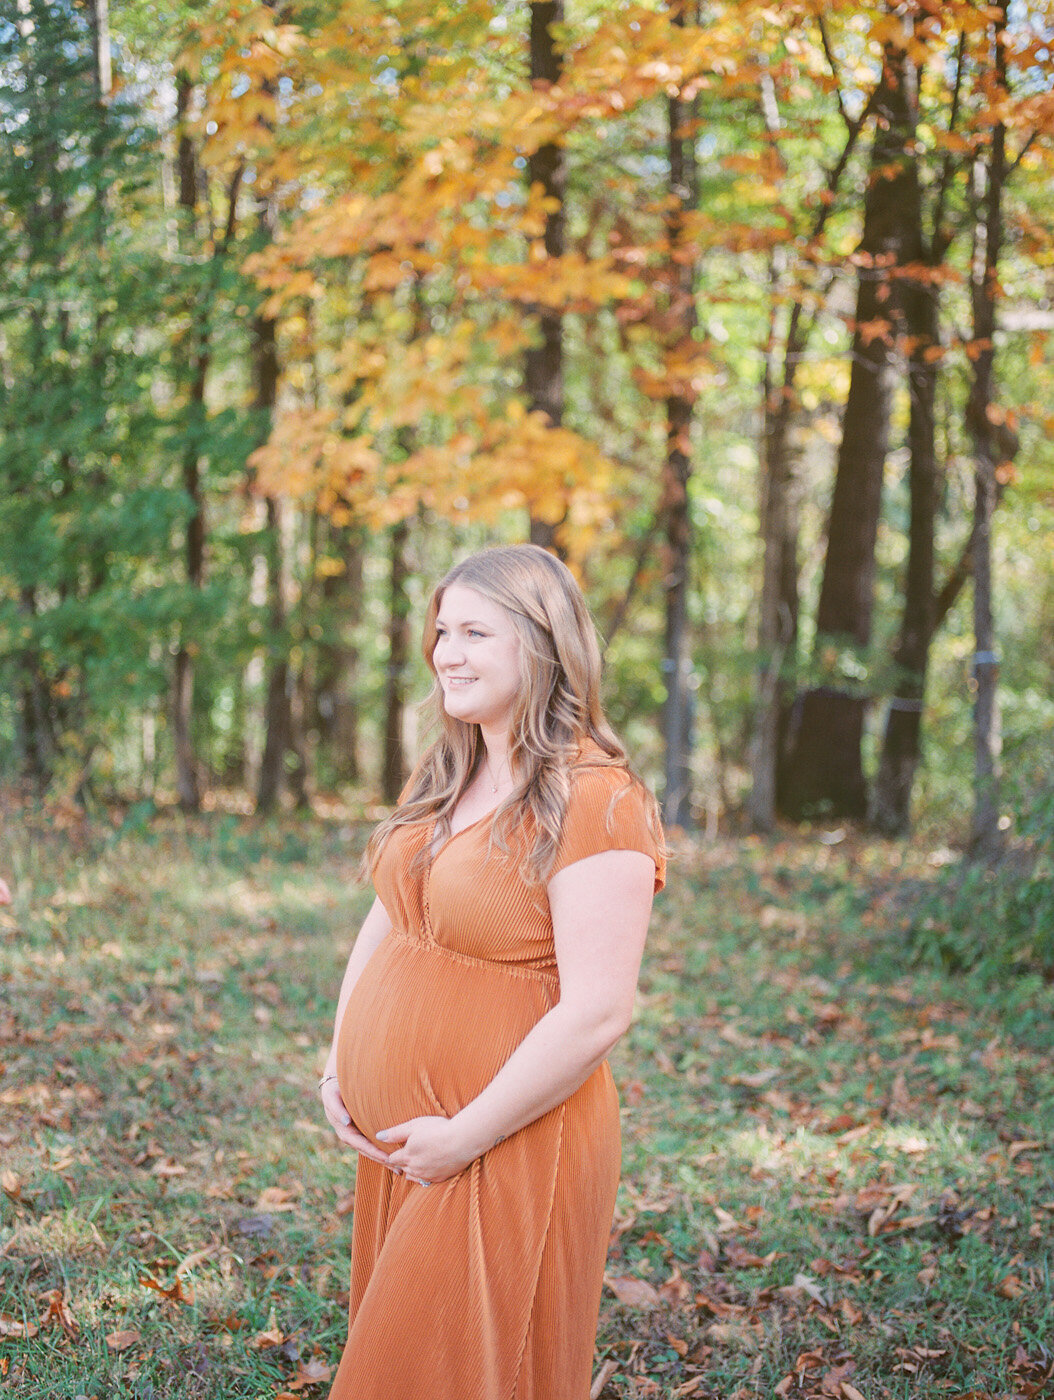 Raleigh Maternity Photographer | Jessica Agee Photography - 013